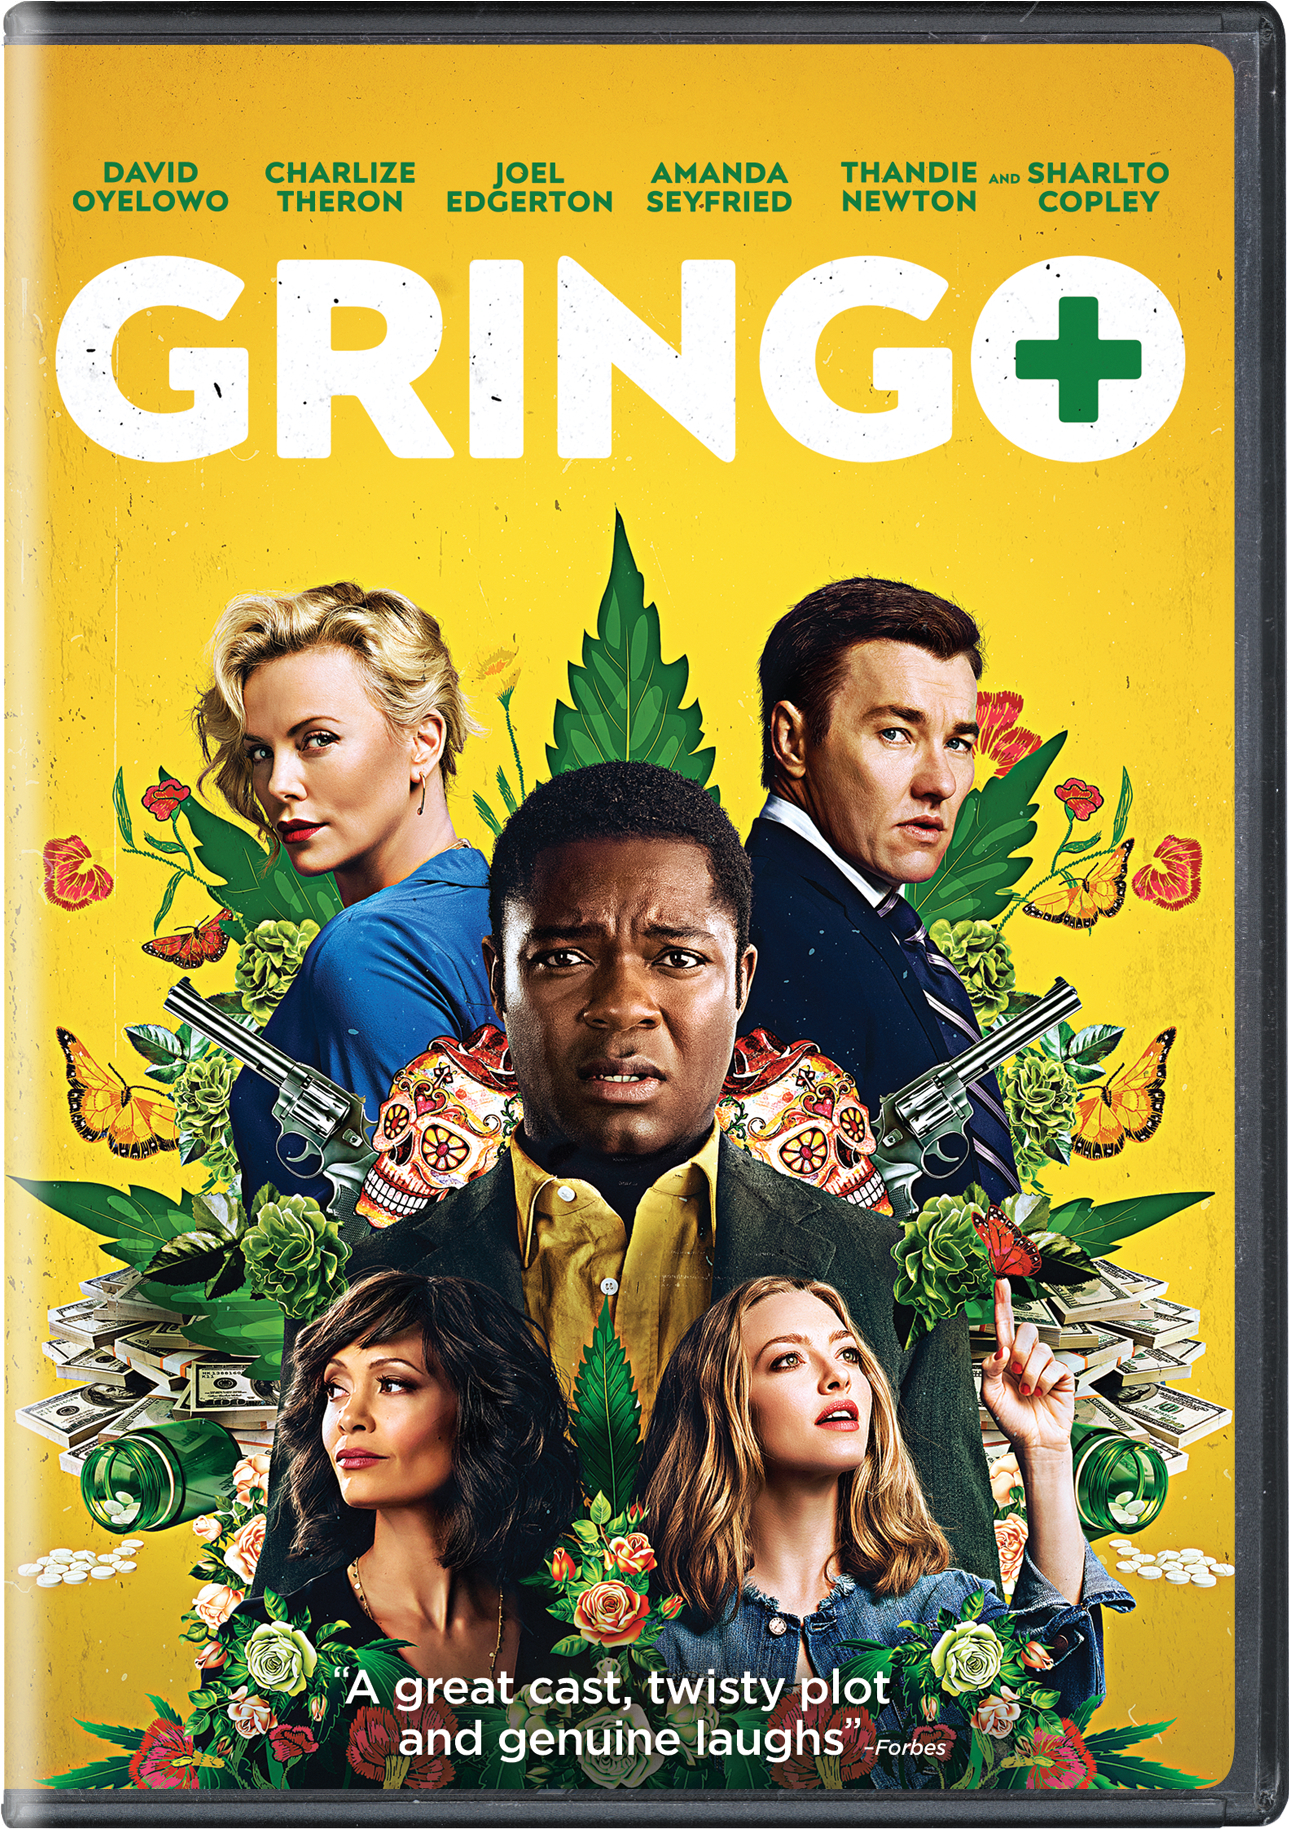 Gringo - DVD [ 2018 ]  - Action Movies On DVD - Movies On GRUV